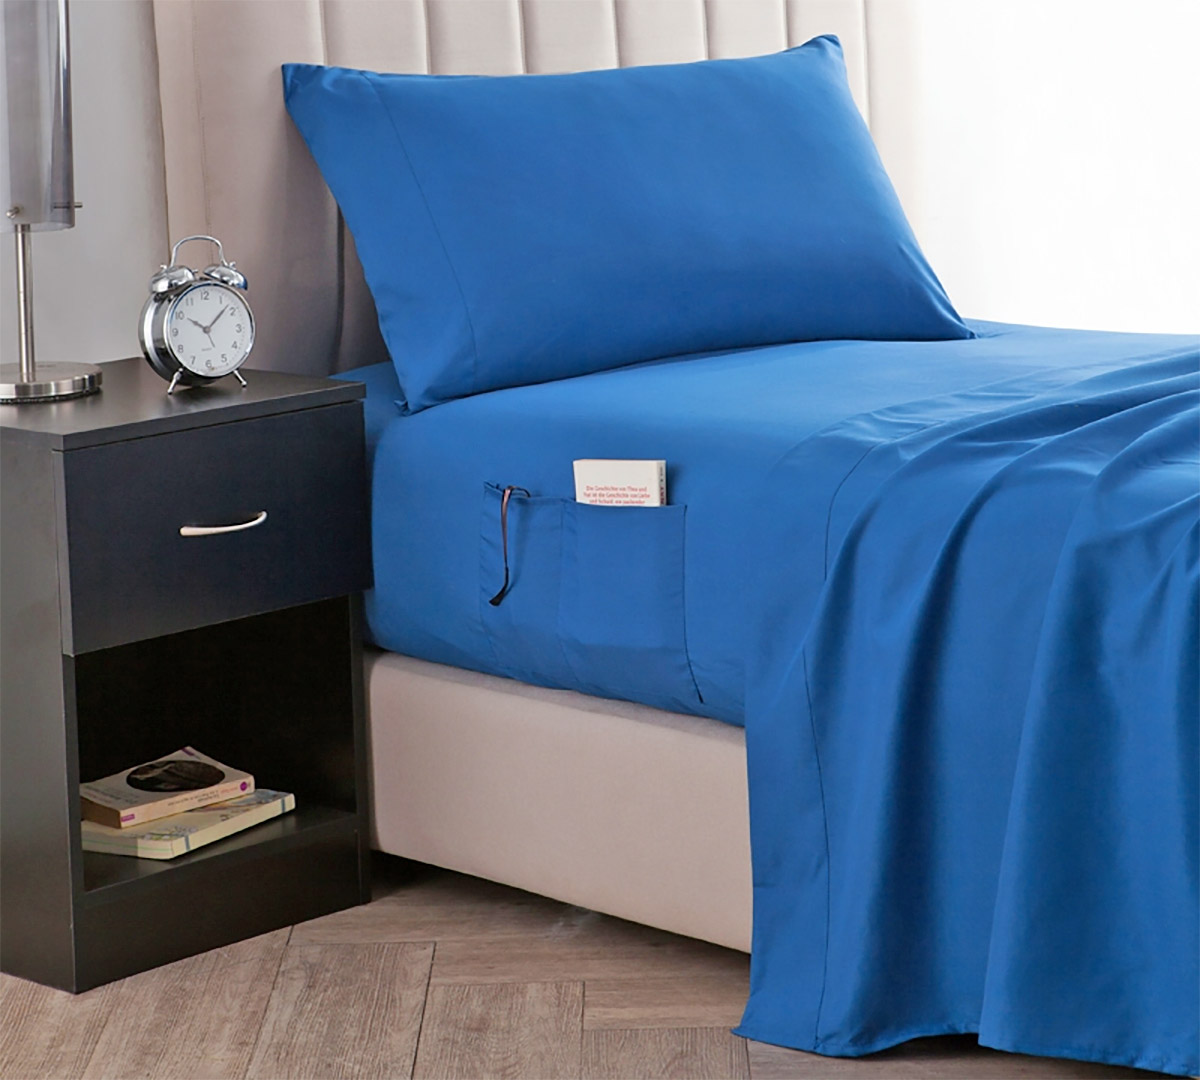 These Bed Sheets Have Pockets On Both Sides Of The Bed For Easy Access To Your Items